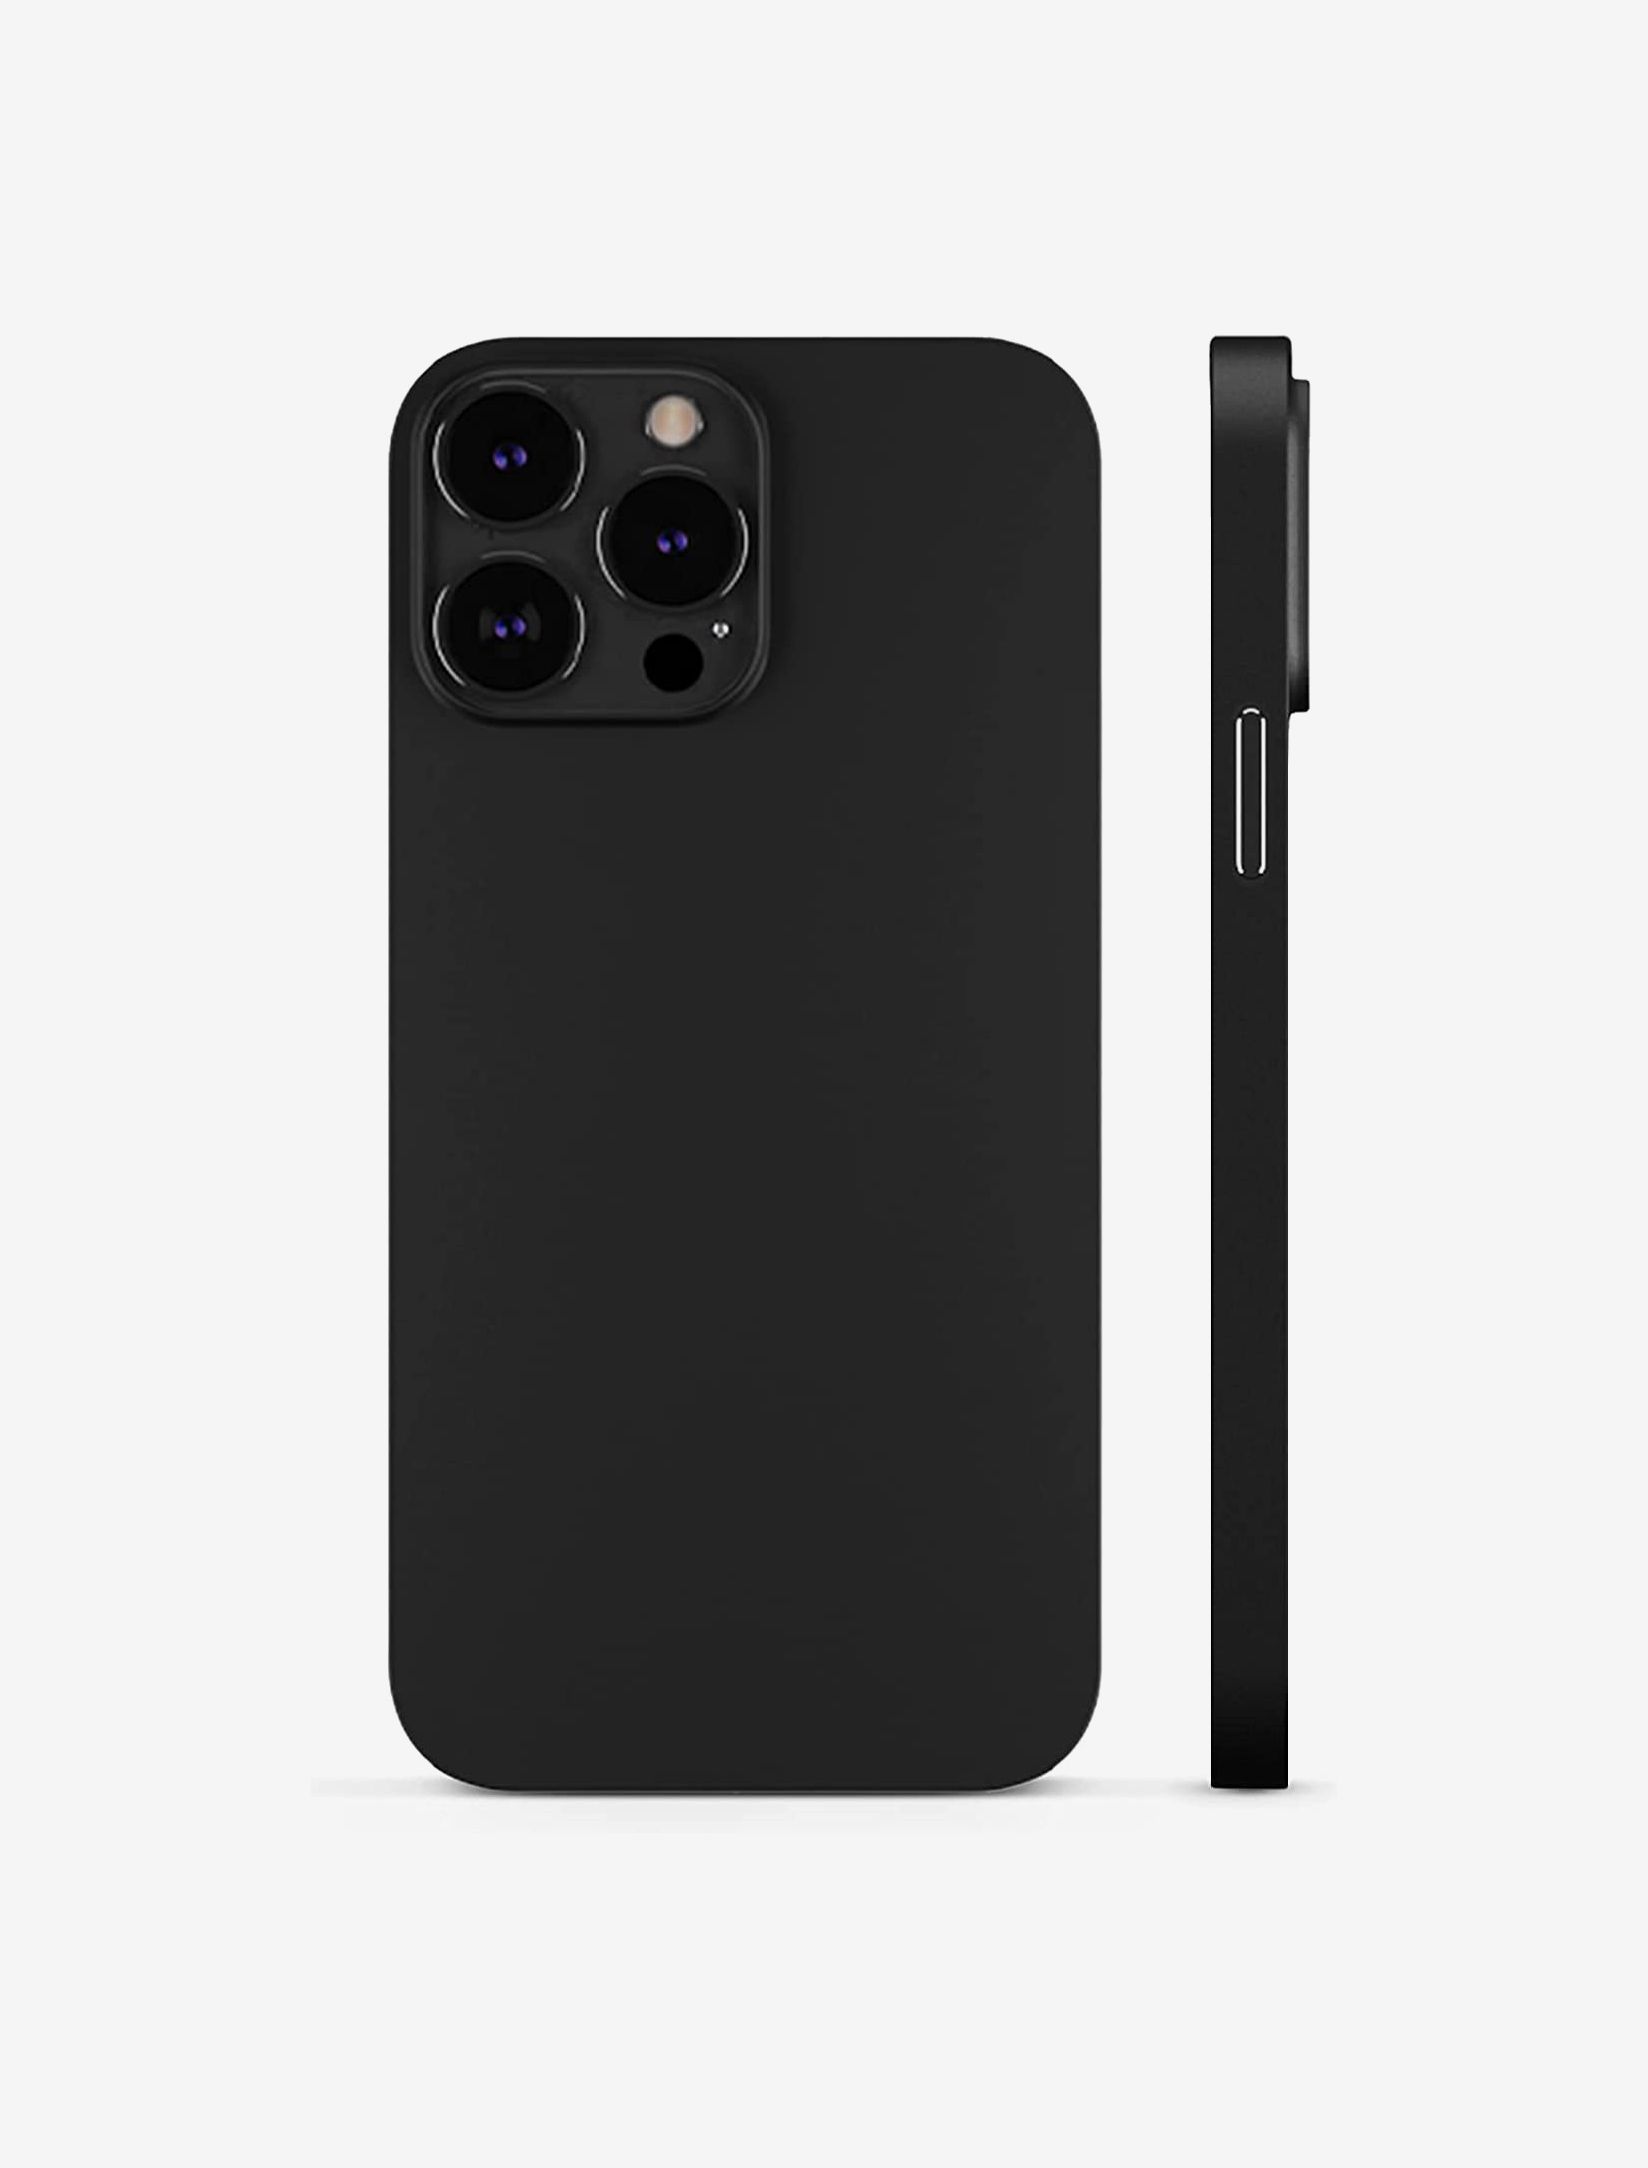 Shop Phone Cases, Top iPhone Cases & Accessories